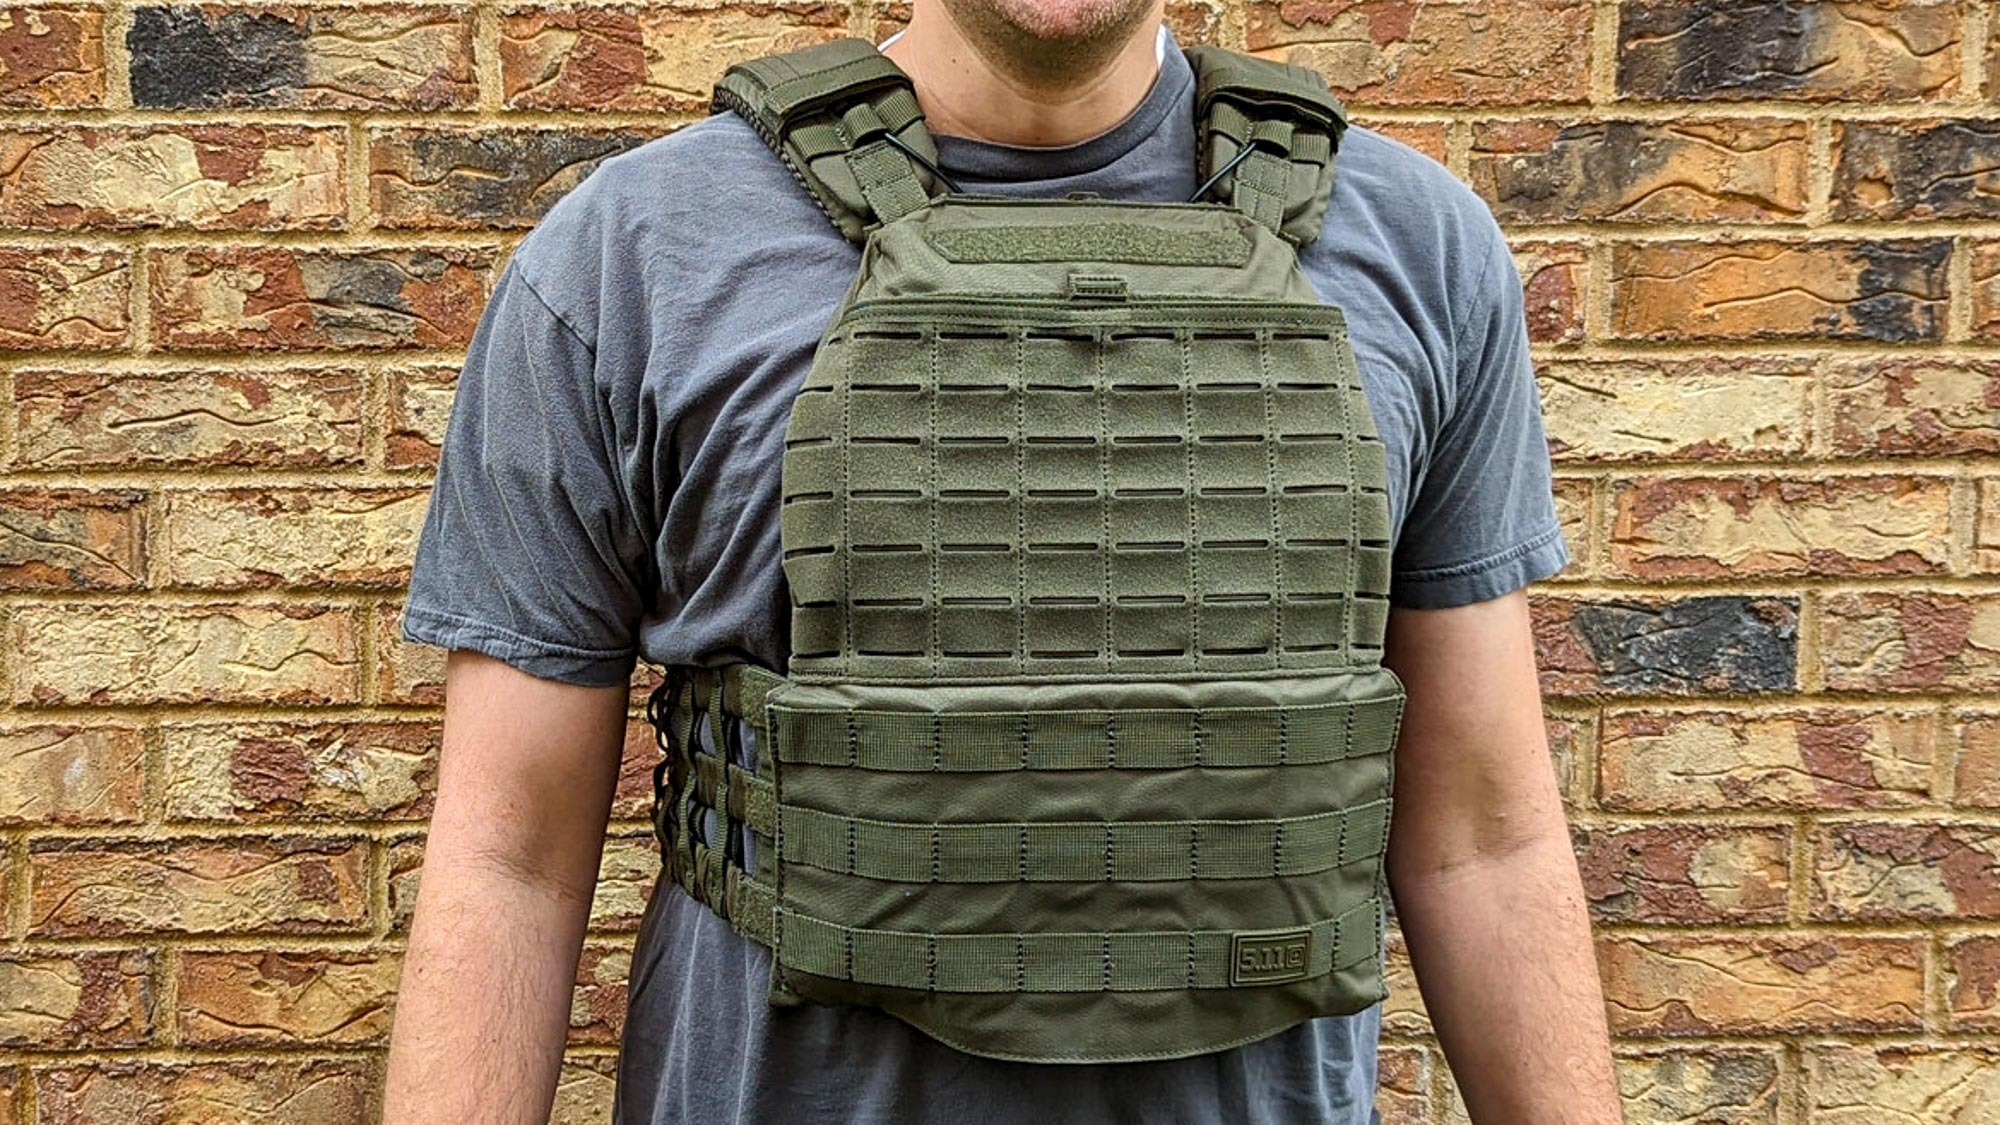 Running with a weight vest: 11 benefits + do's and don'ts - Run